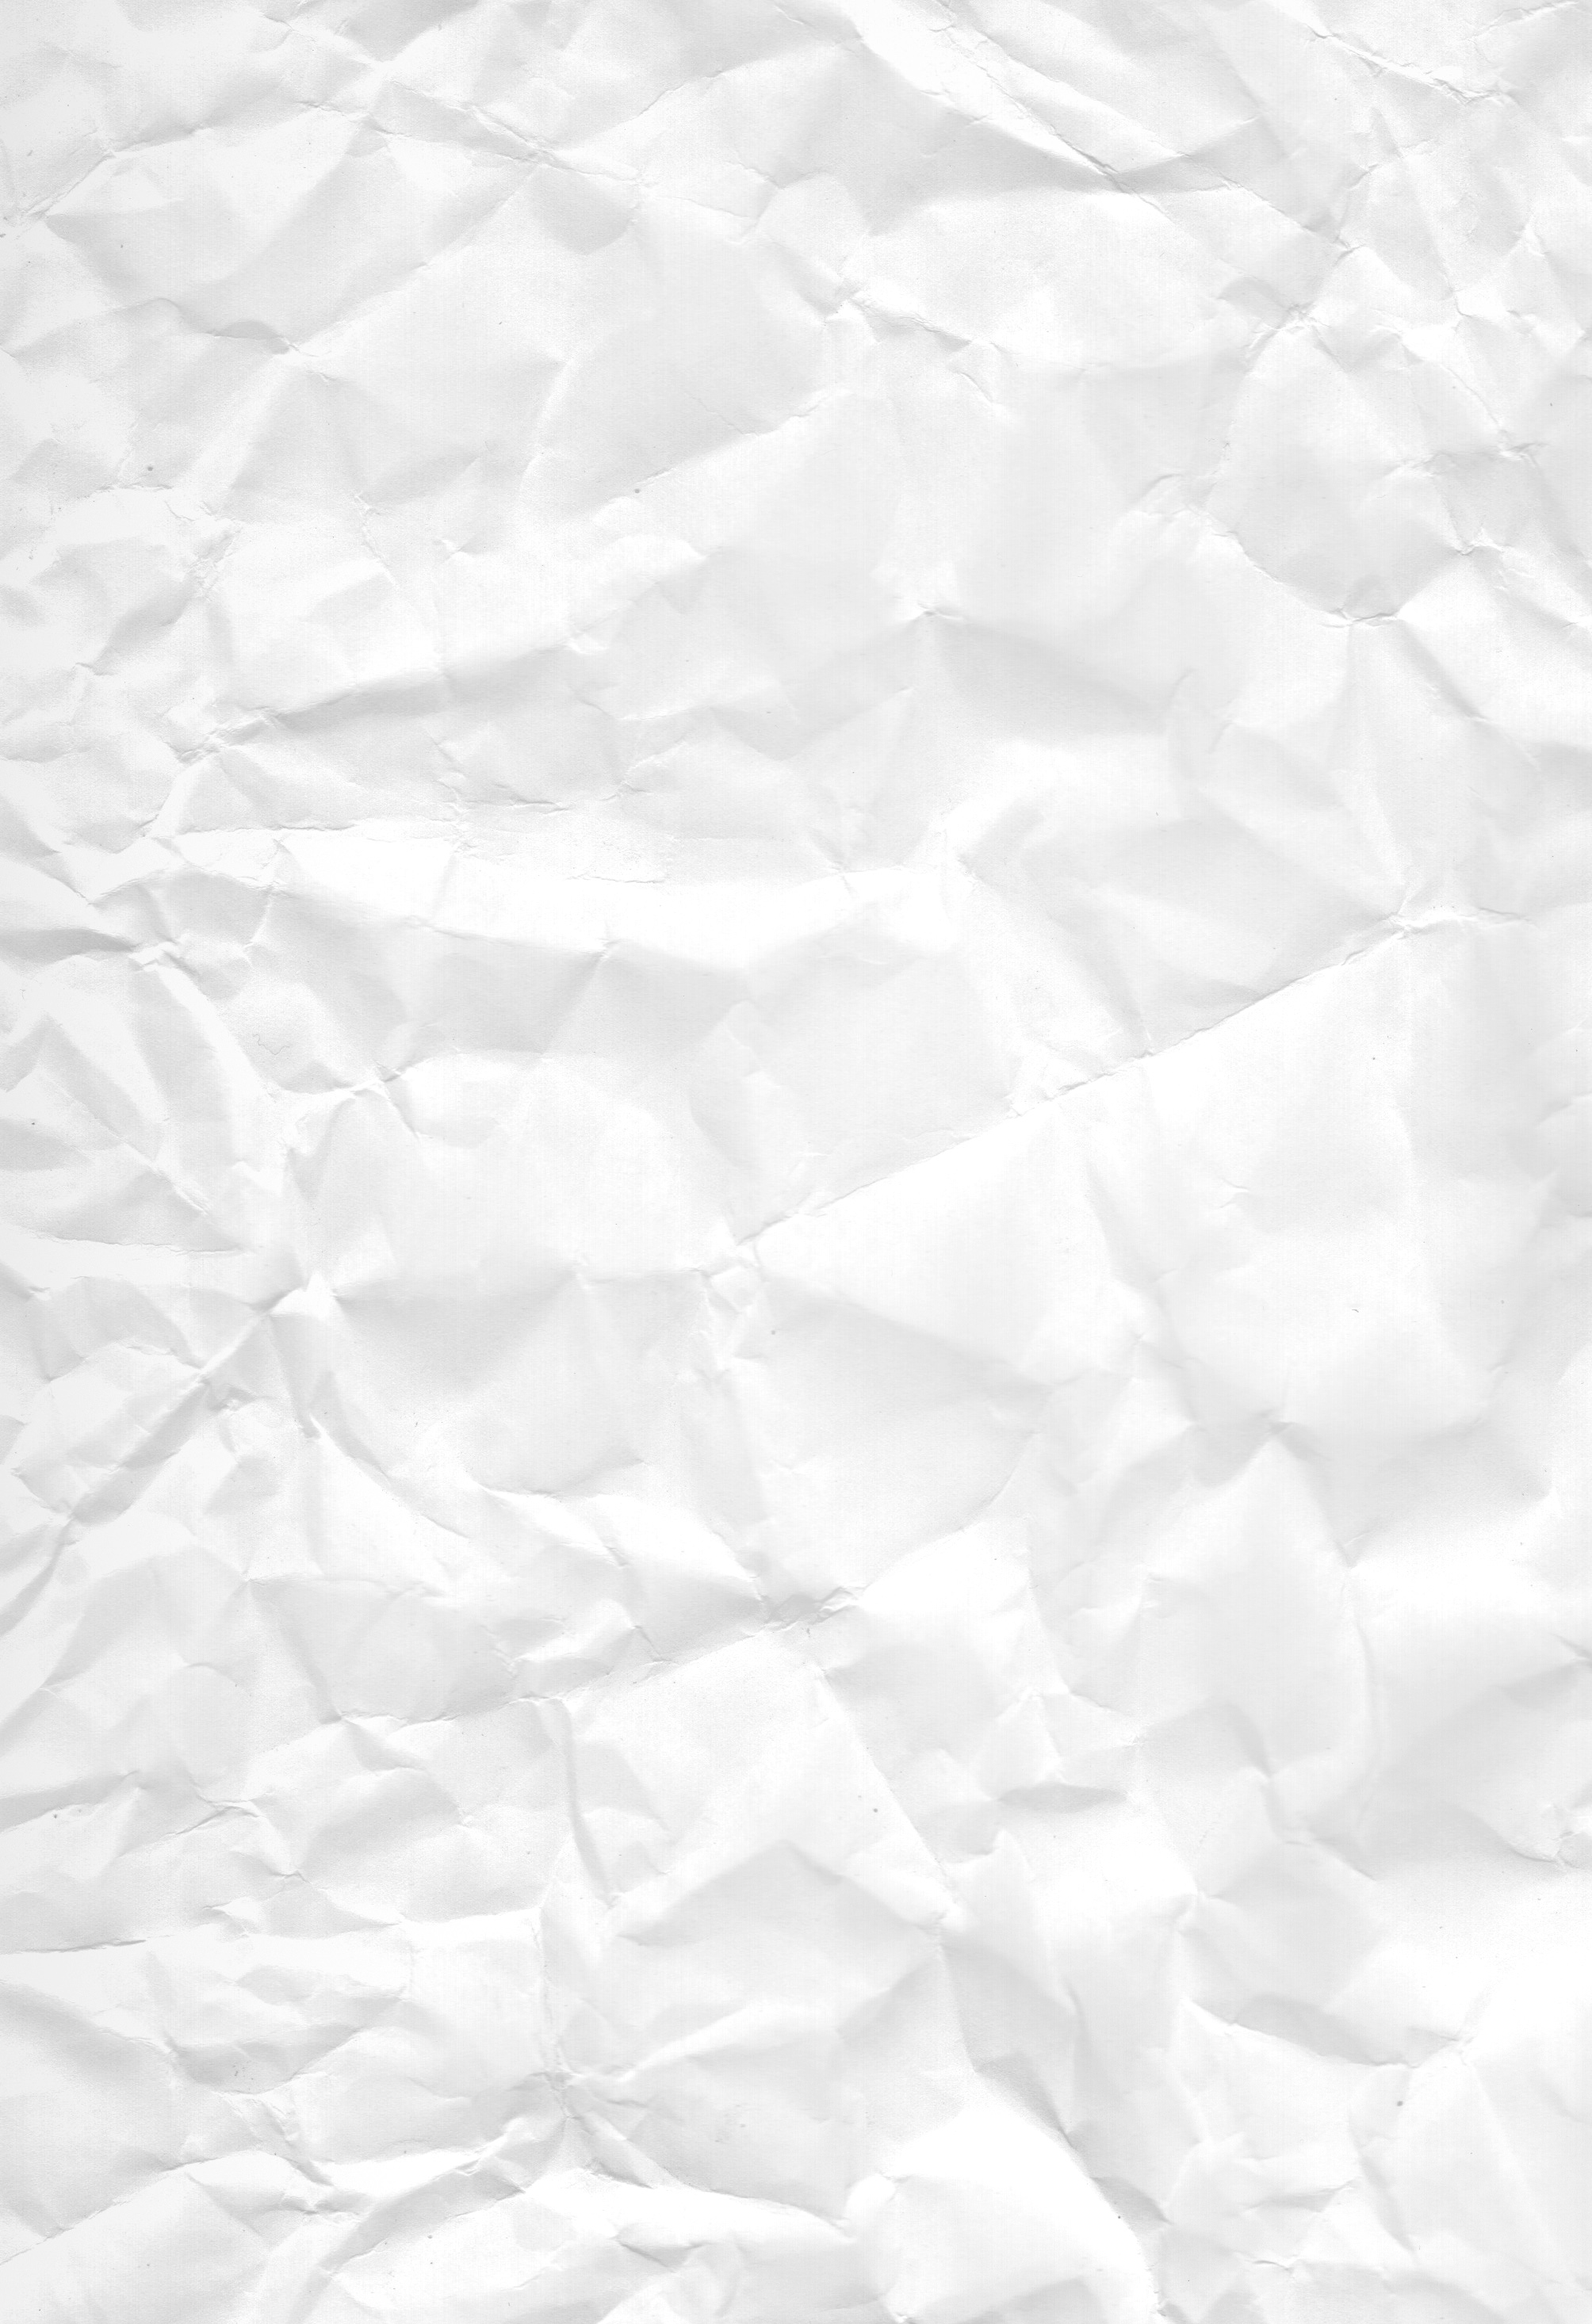 Wrinkled paper, Papers, Wrinkle, White, Wallpaper, HQ Photo